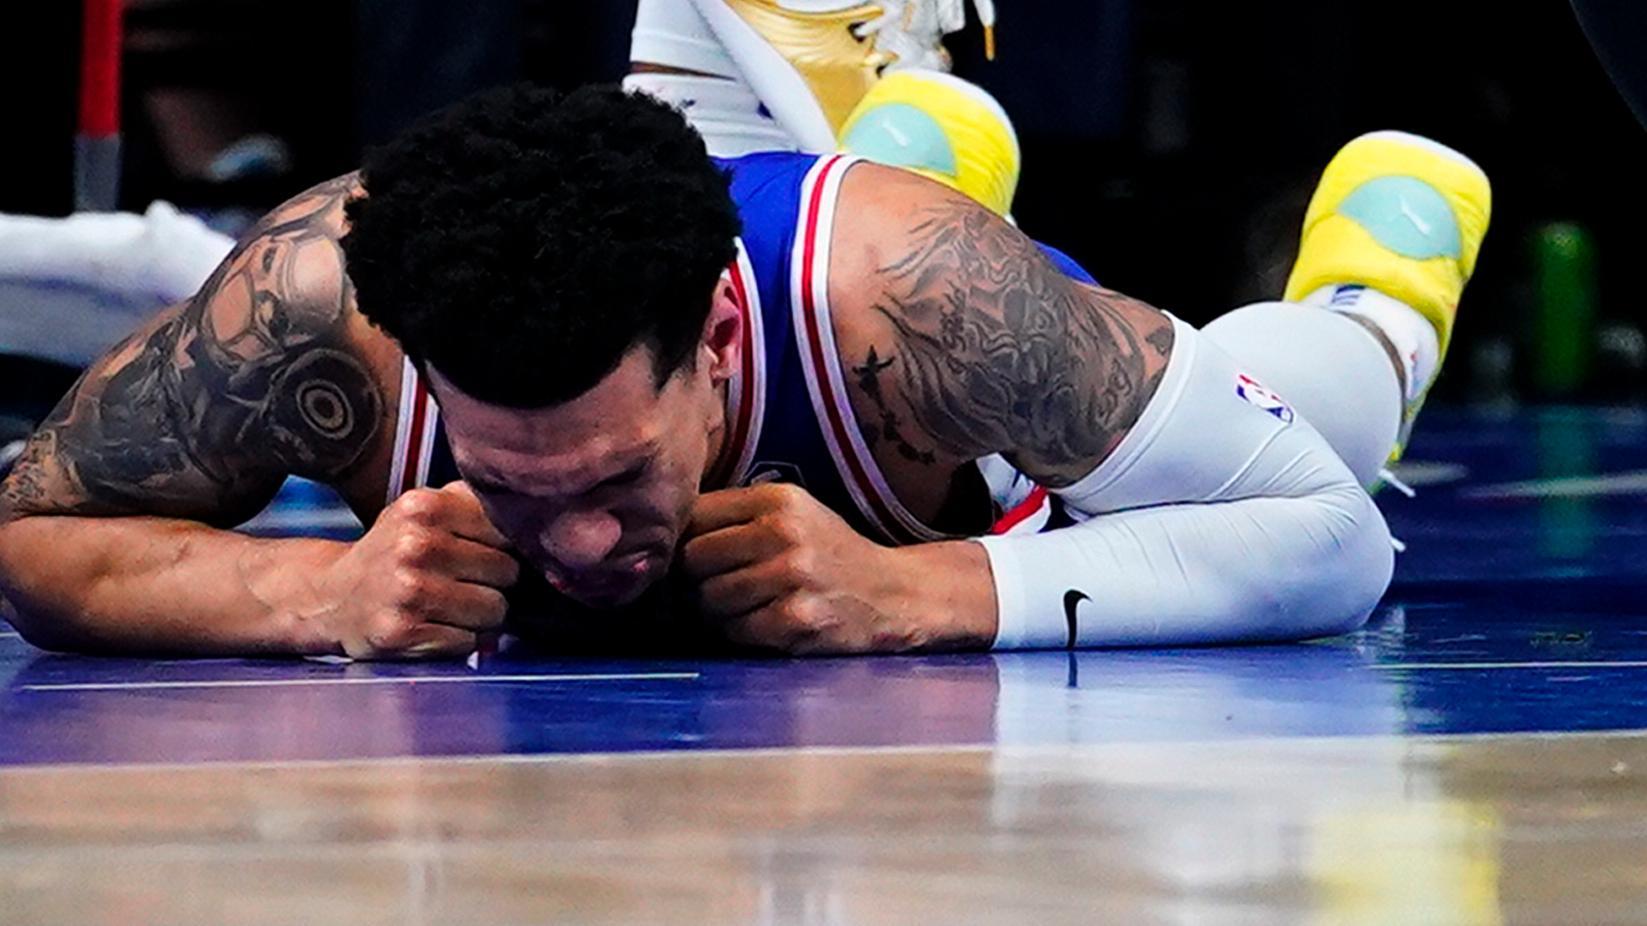 Danny Green suffers left knee injury after collision with Joel Embiid